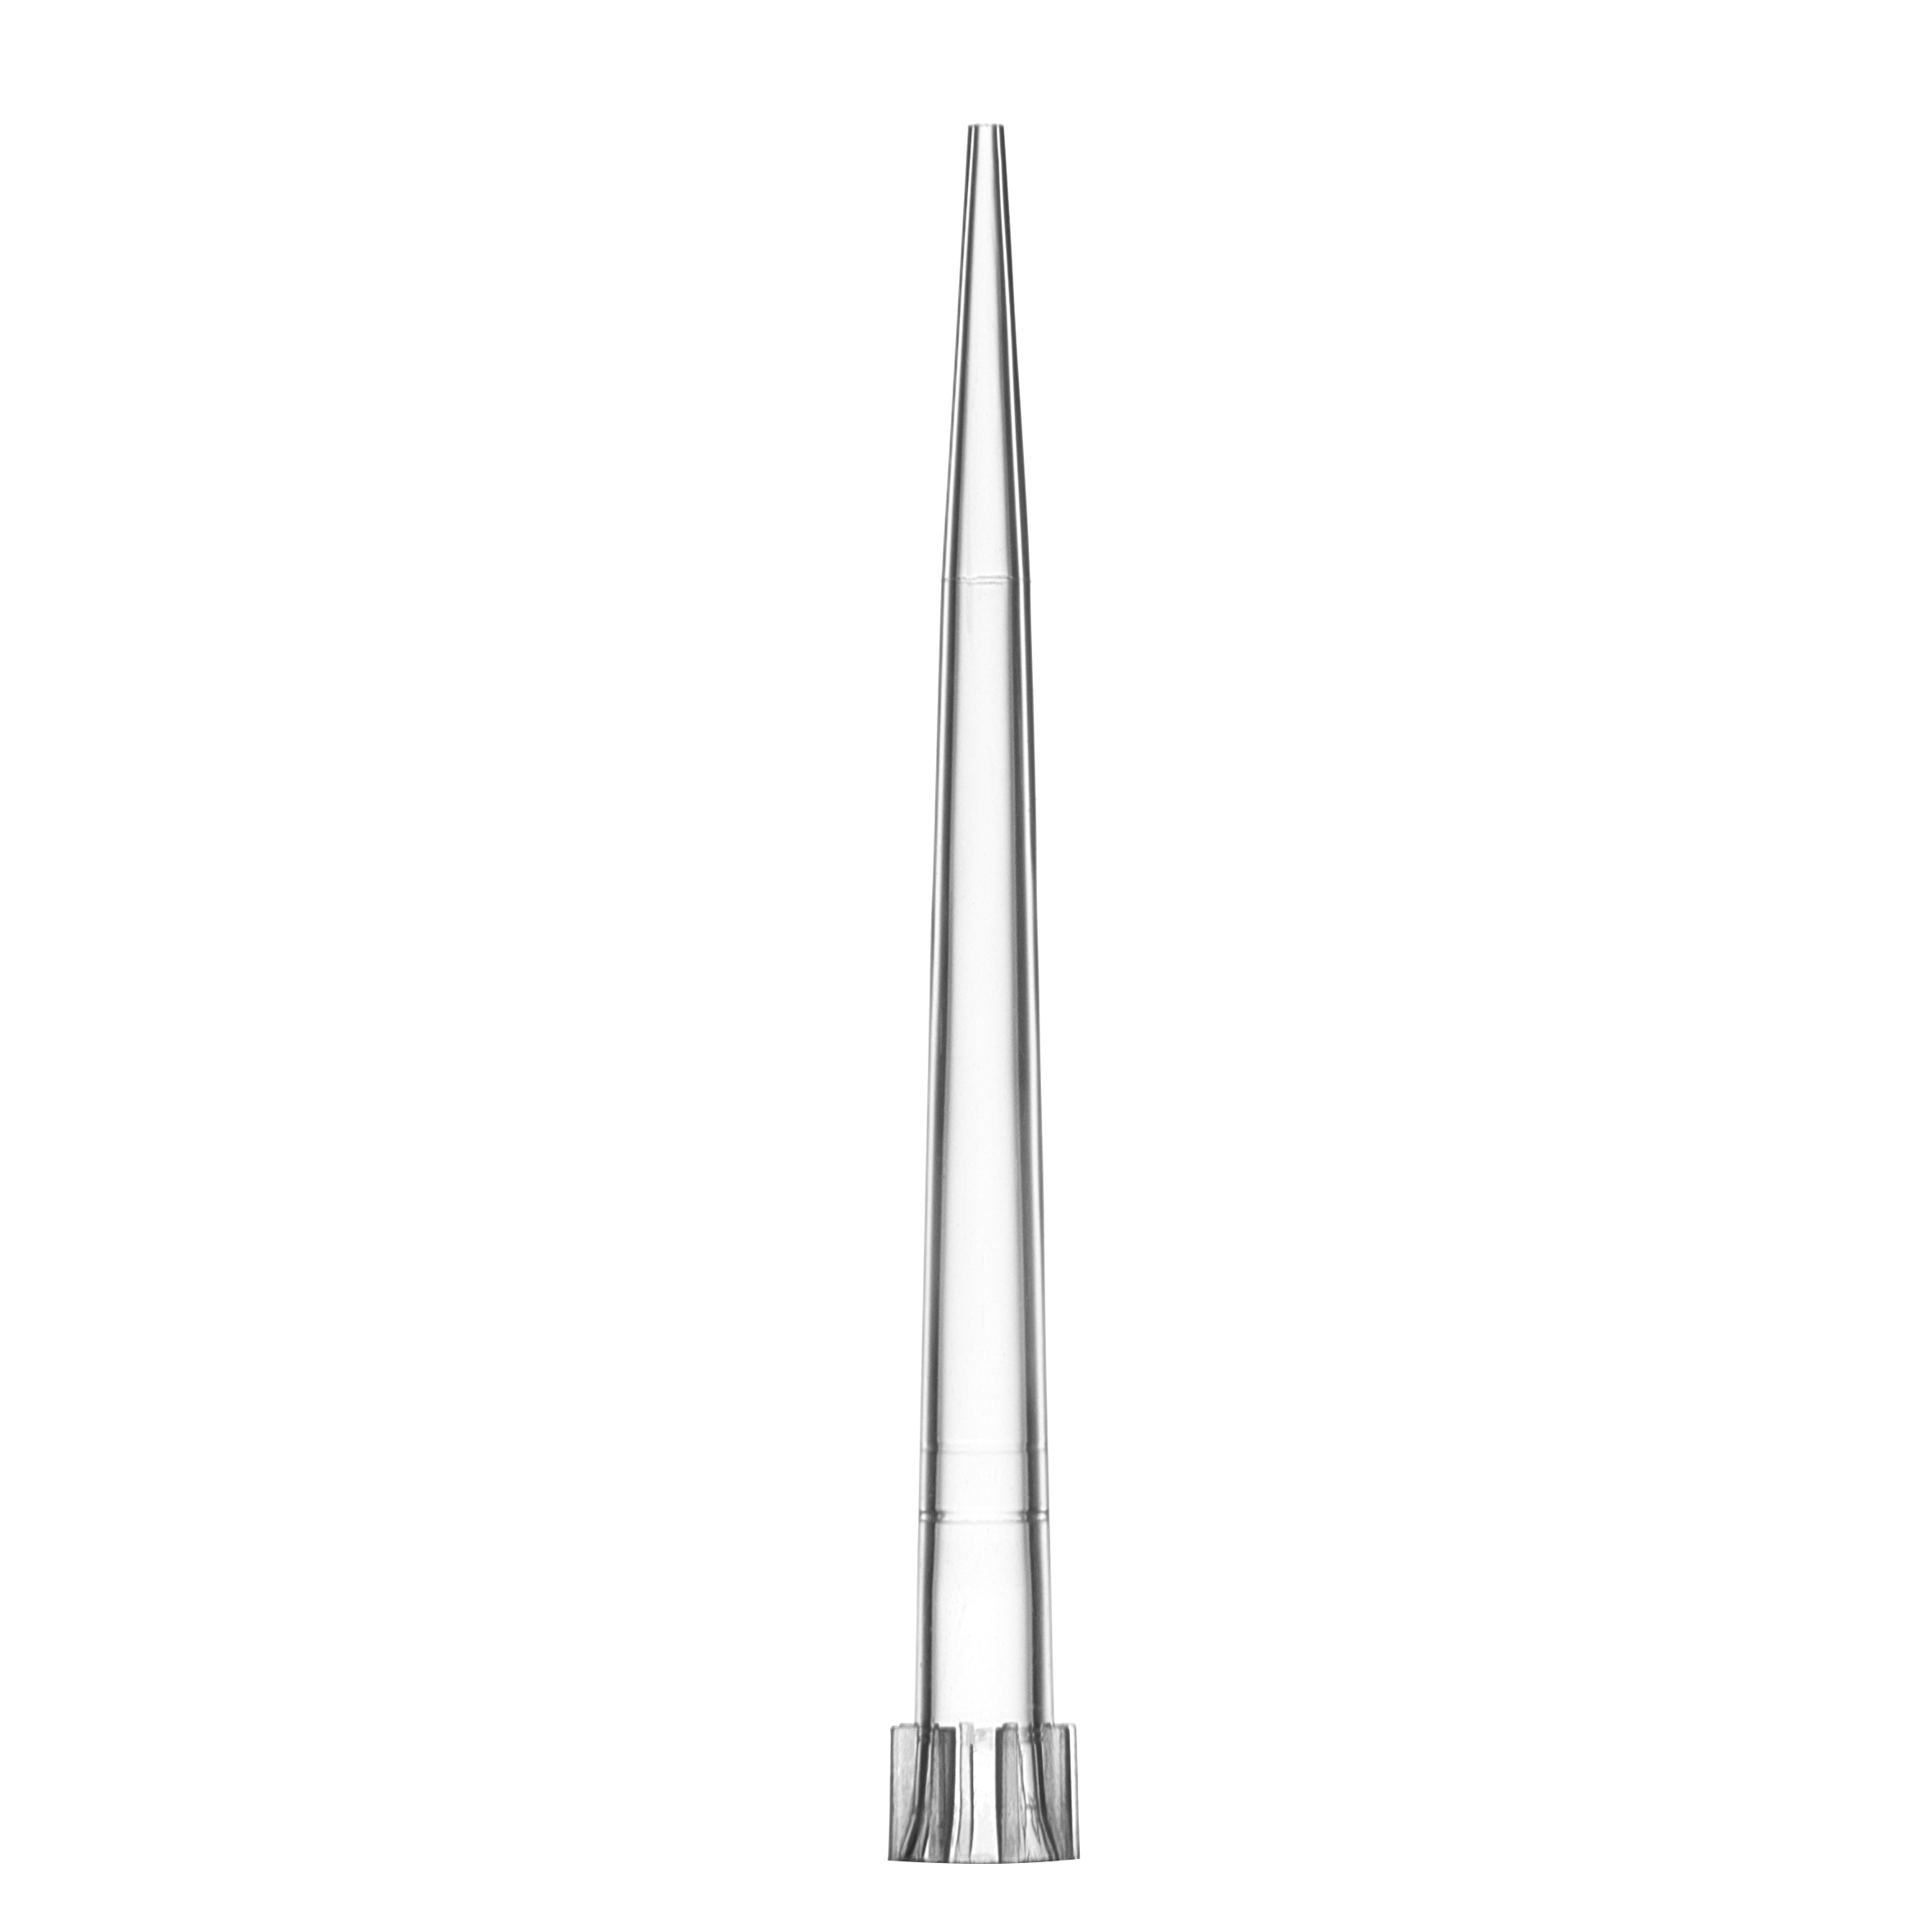 Universal Pipette Tips are autoclavable and designed to fit most common pipettes